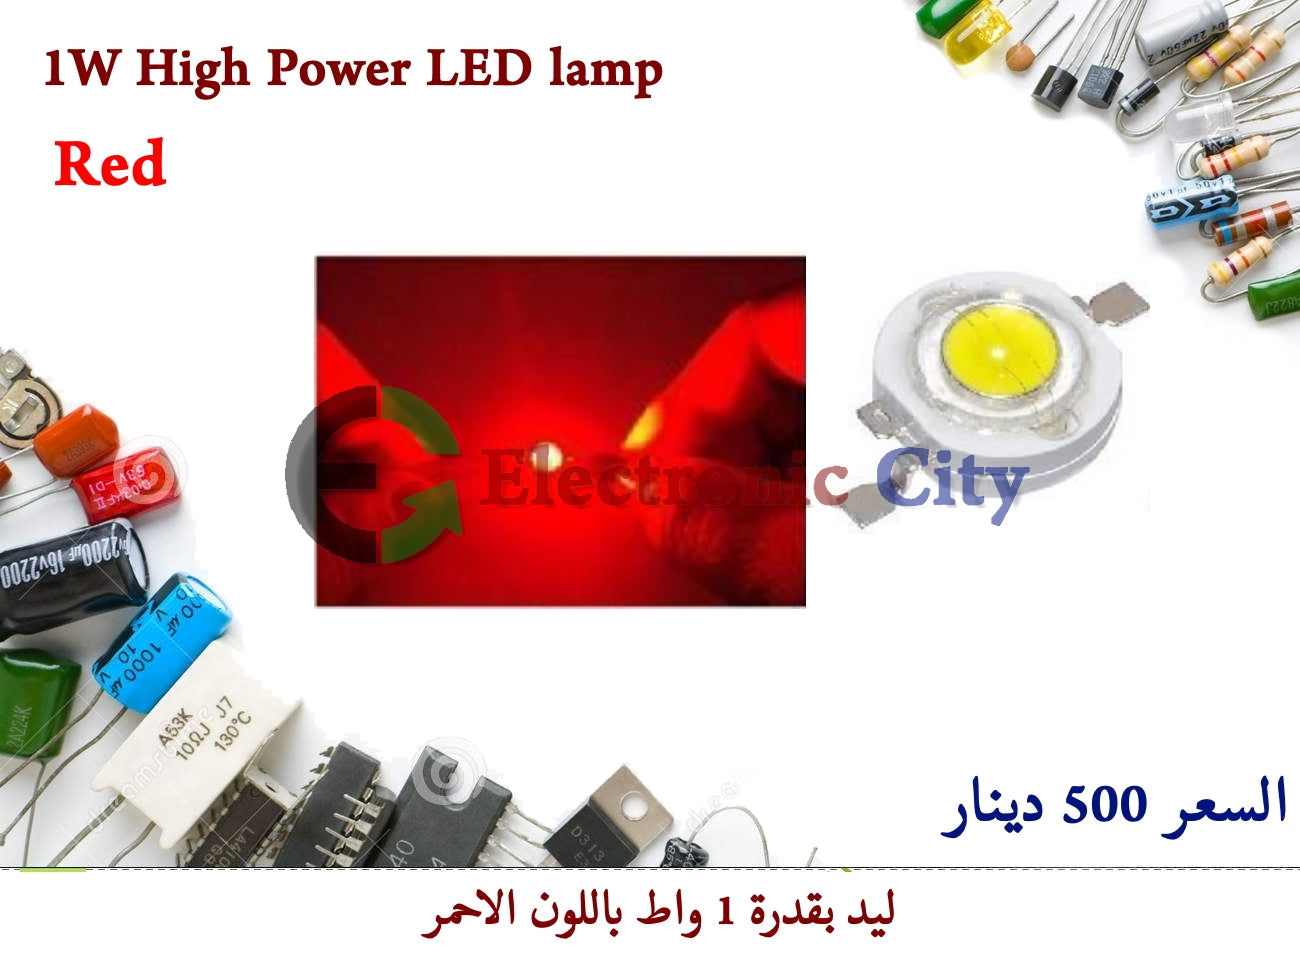 1W High Power LED lamp Red